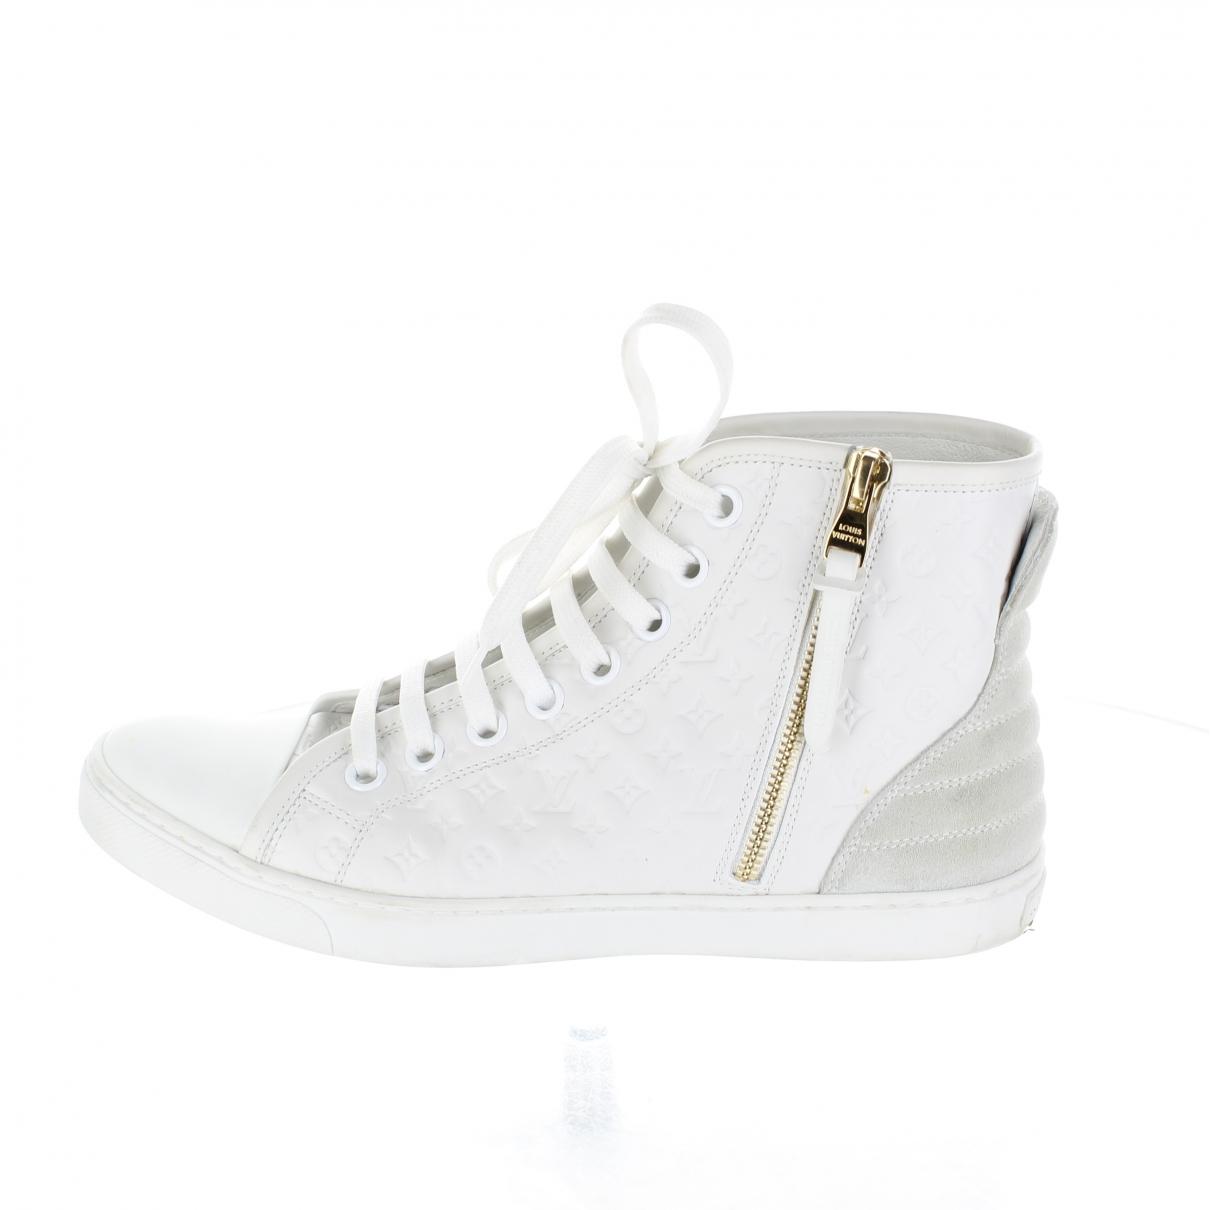 Lyst - Louis Vuitton Leather Heels in White